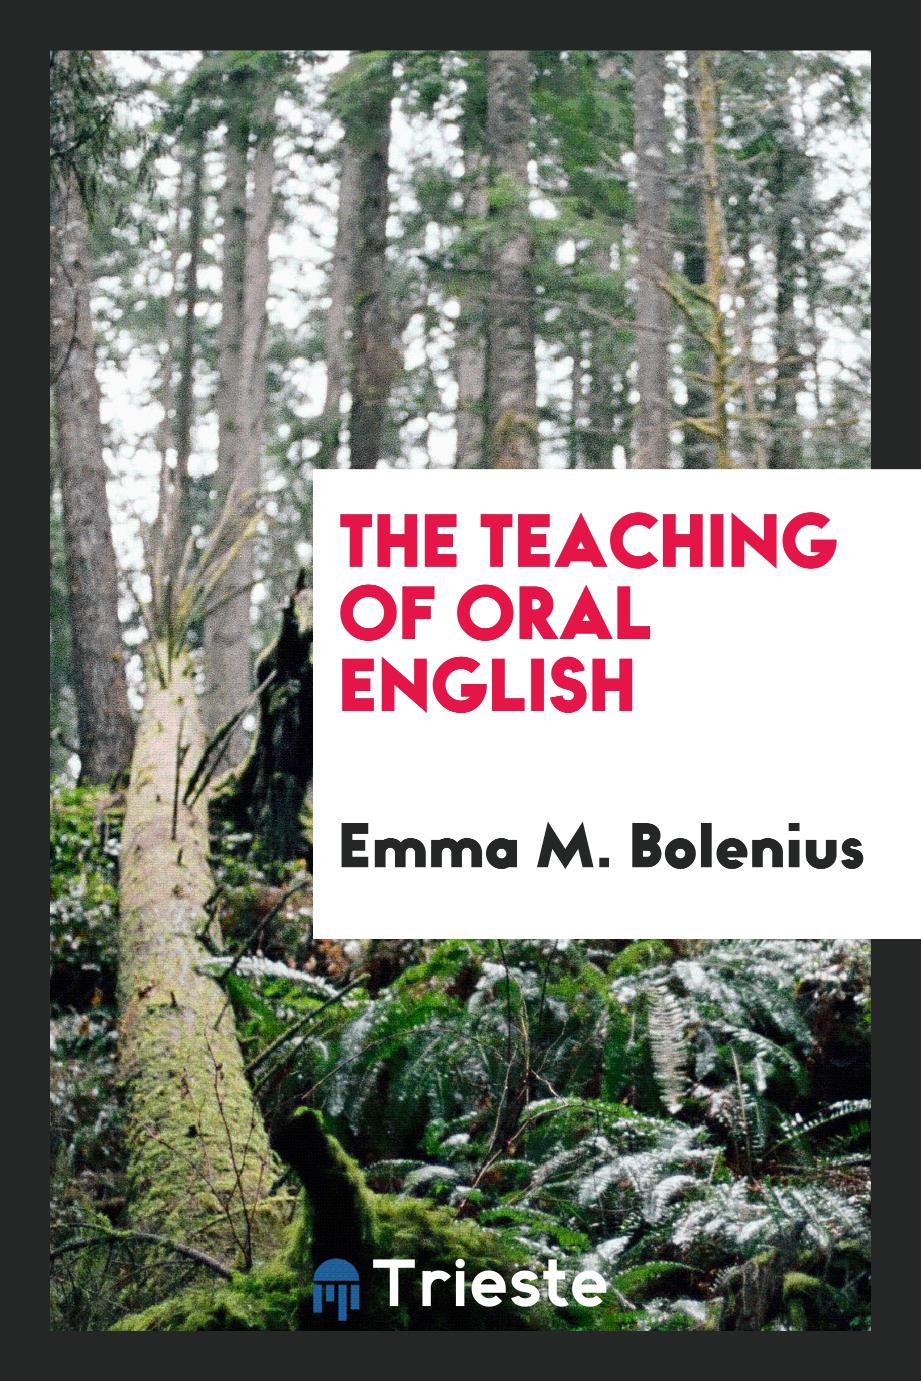 The teaching of oral English